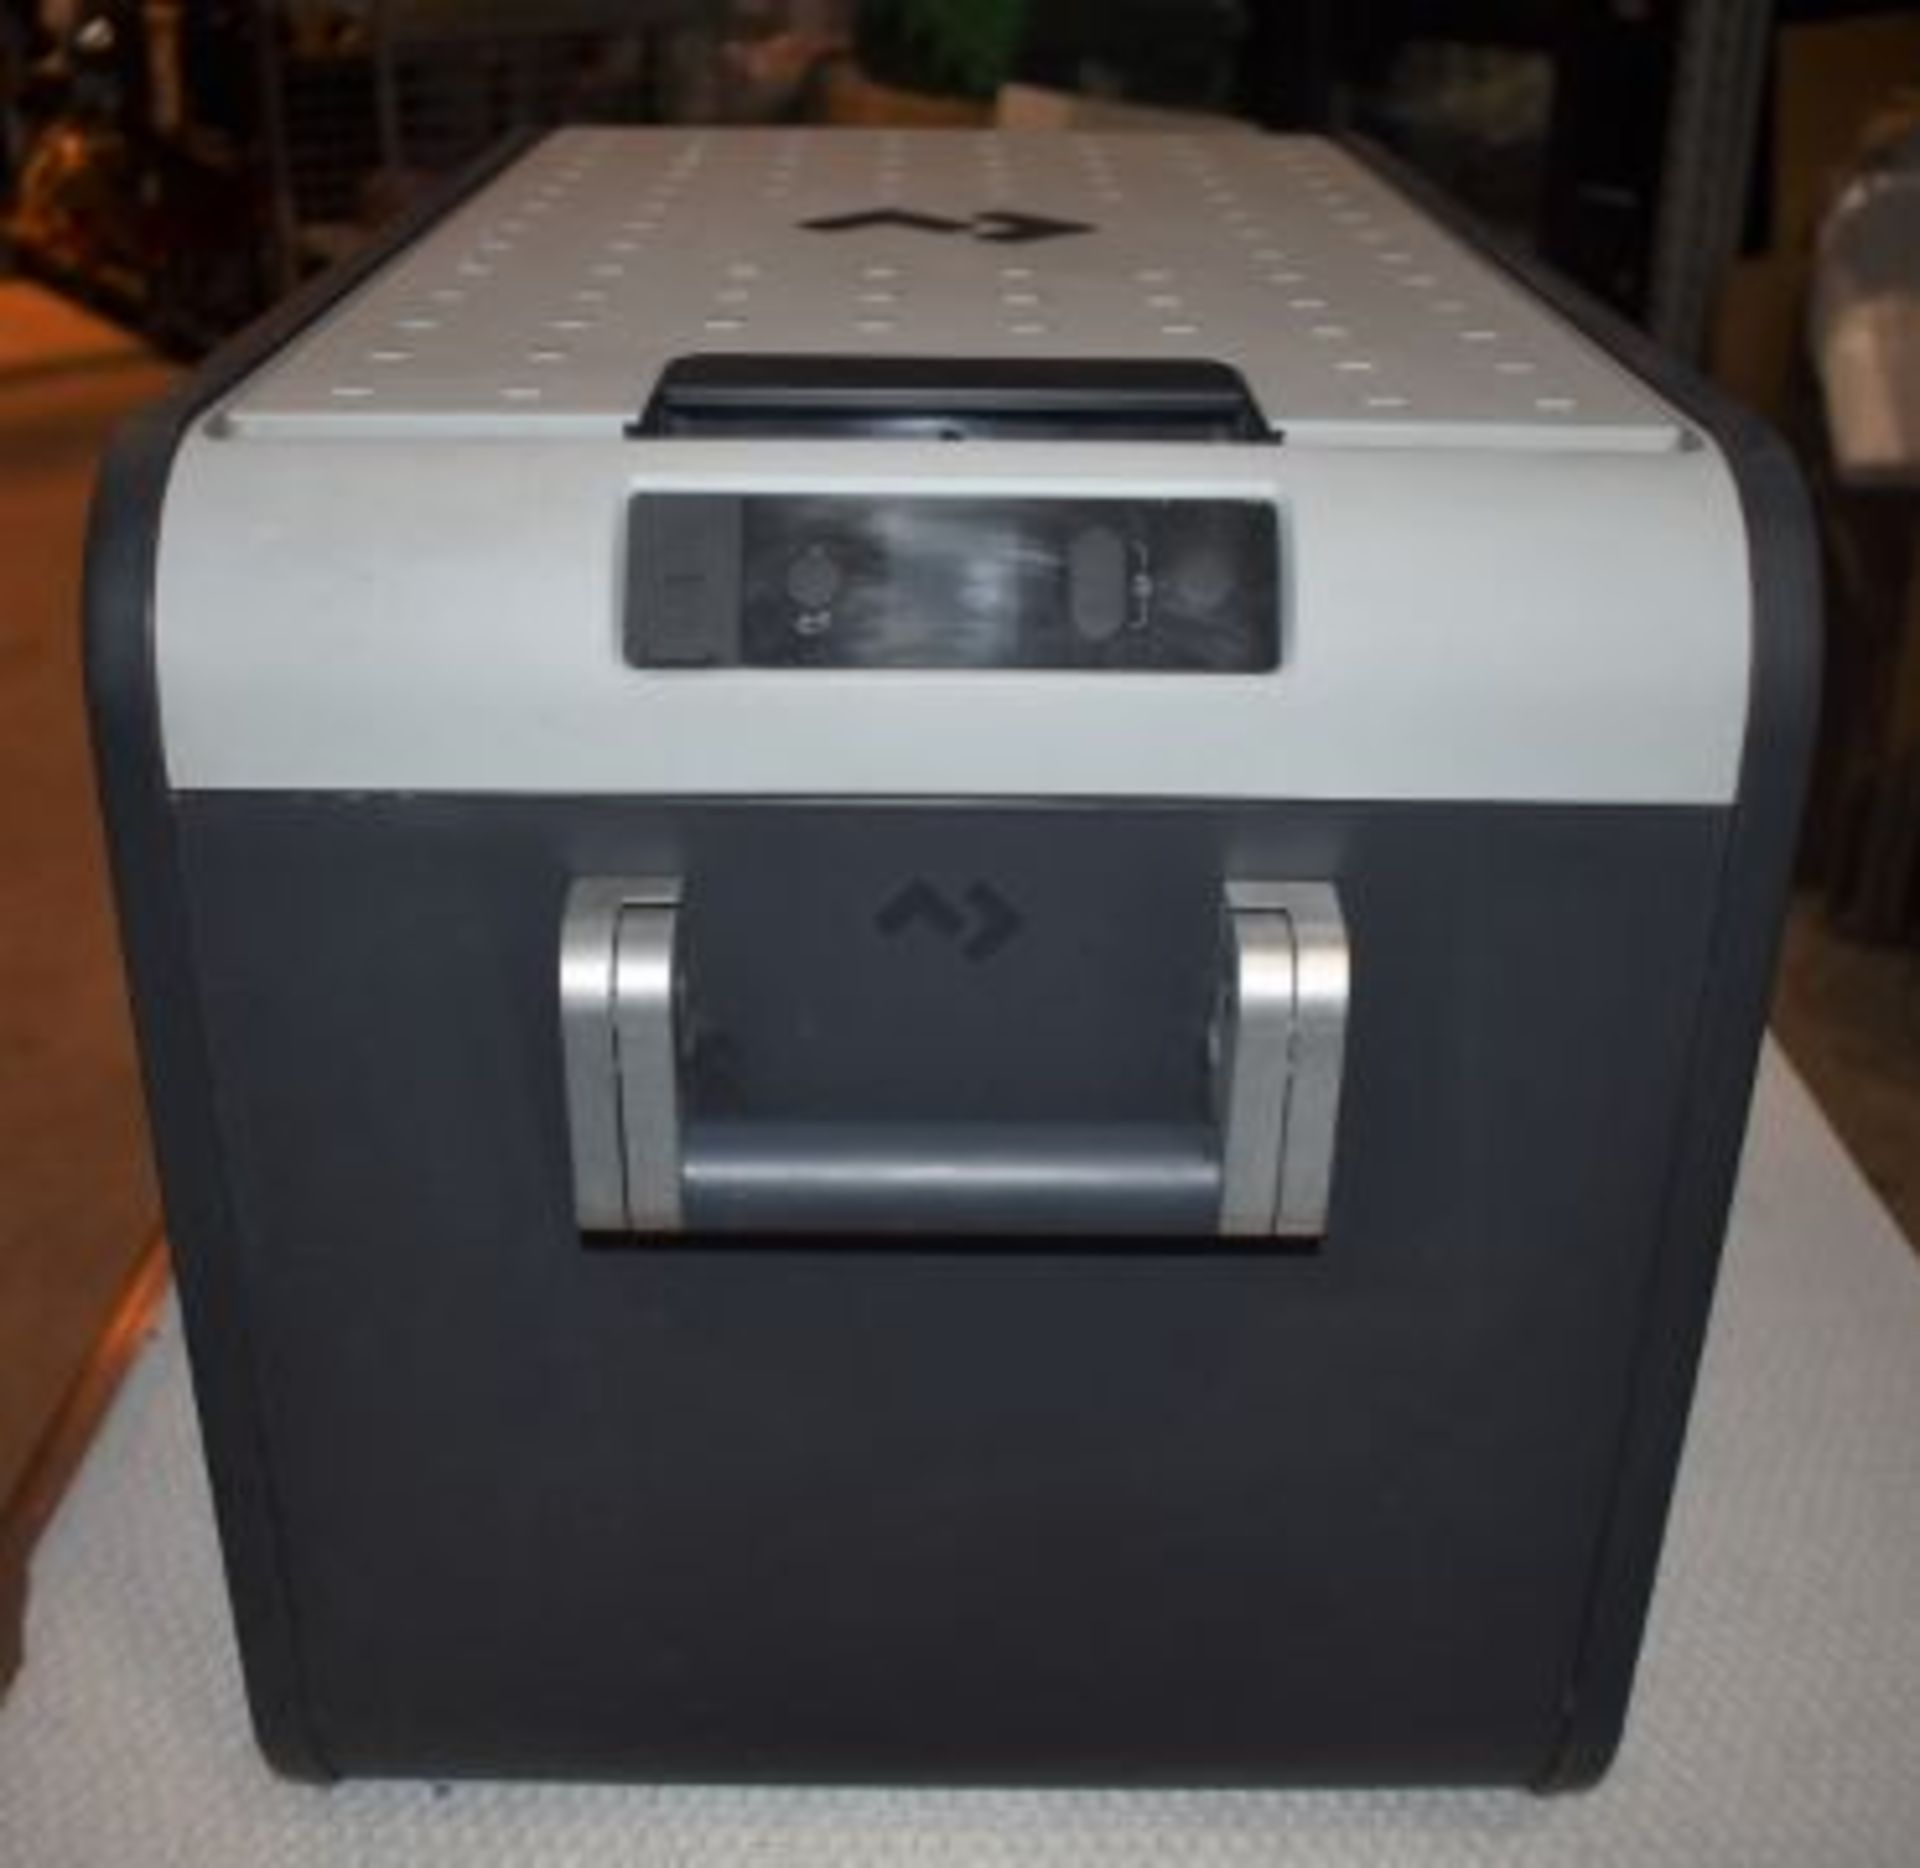 1 x Dometic CFX3 35 Portable 32l Compressor Cooler and Freezer - Perfect For Cooling The Christmas - Image 7 of 9